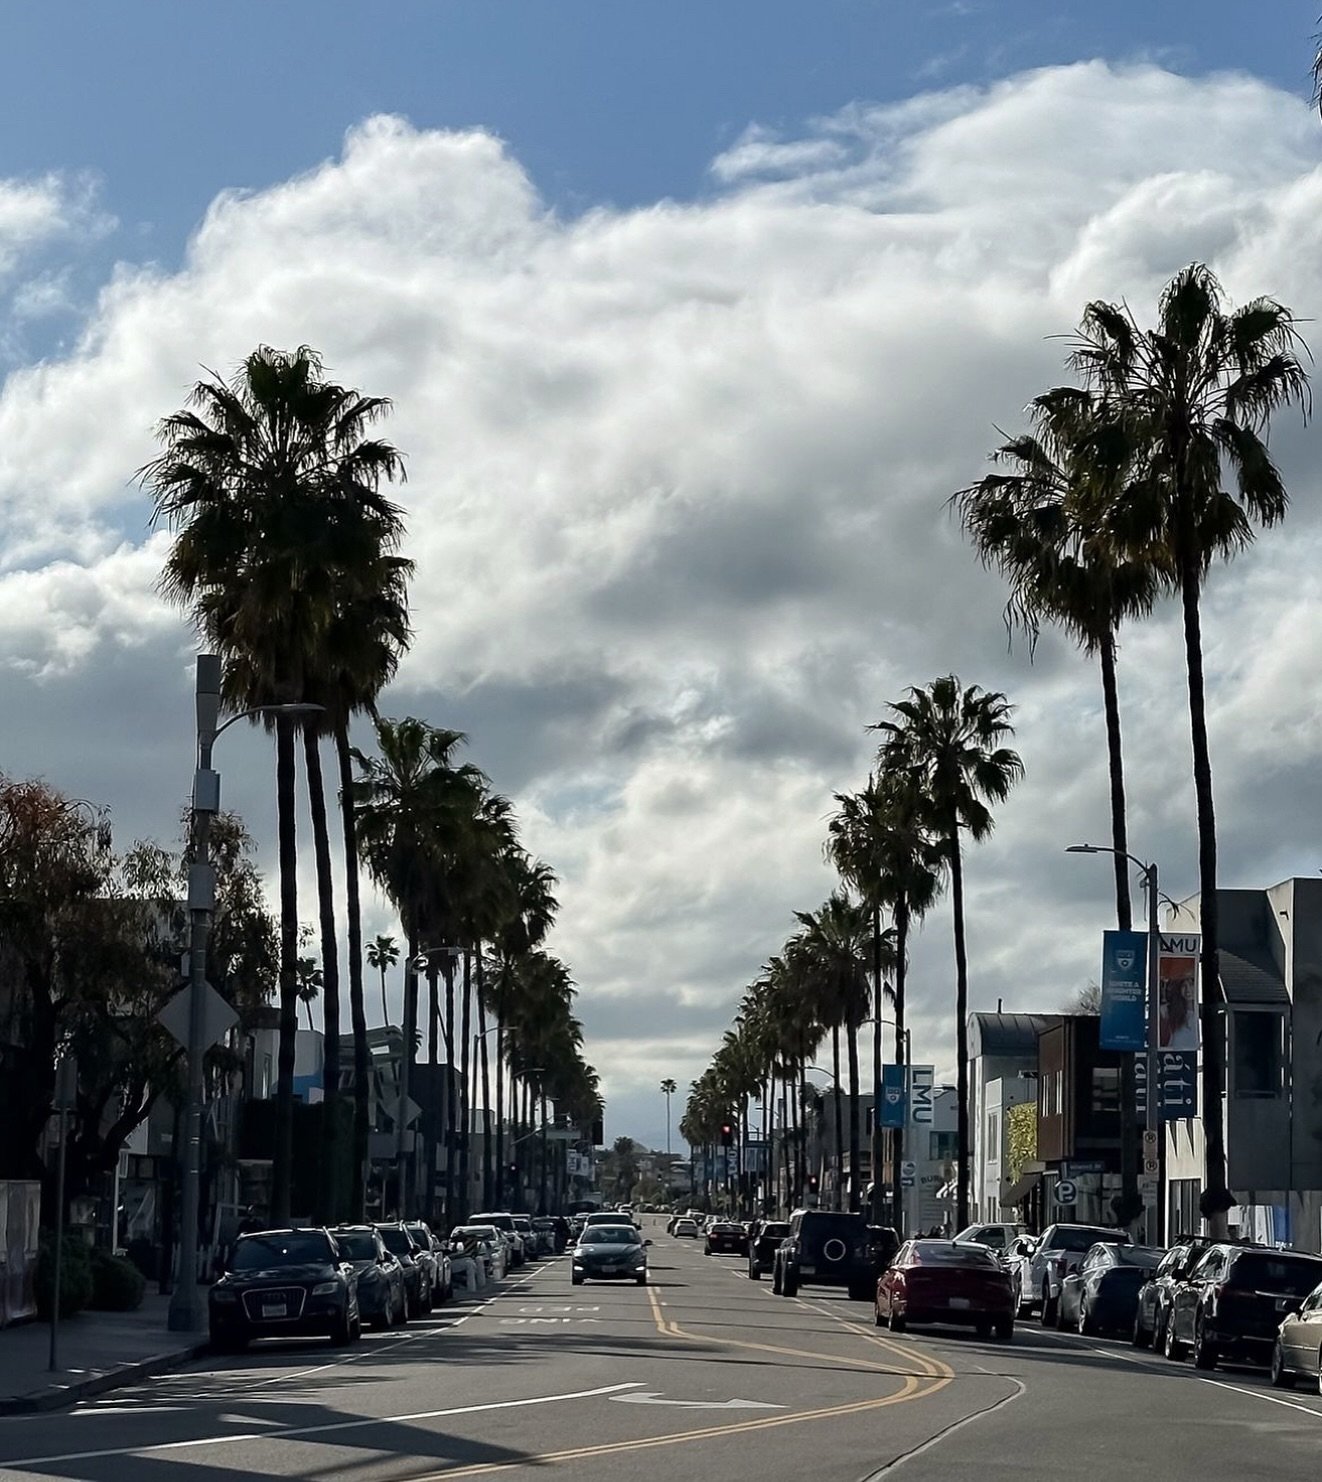 Palm trees and a nice breeze 🌴 A gorgeous day on Abbot Kinney! Join us!
.
.
(📷: @travelgram_bremen )#abbotkinney #abbotkinneyblvd #venicecalifornia #venicebeach